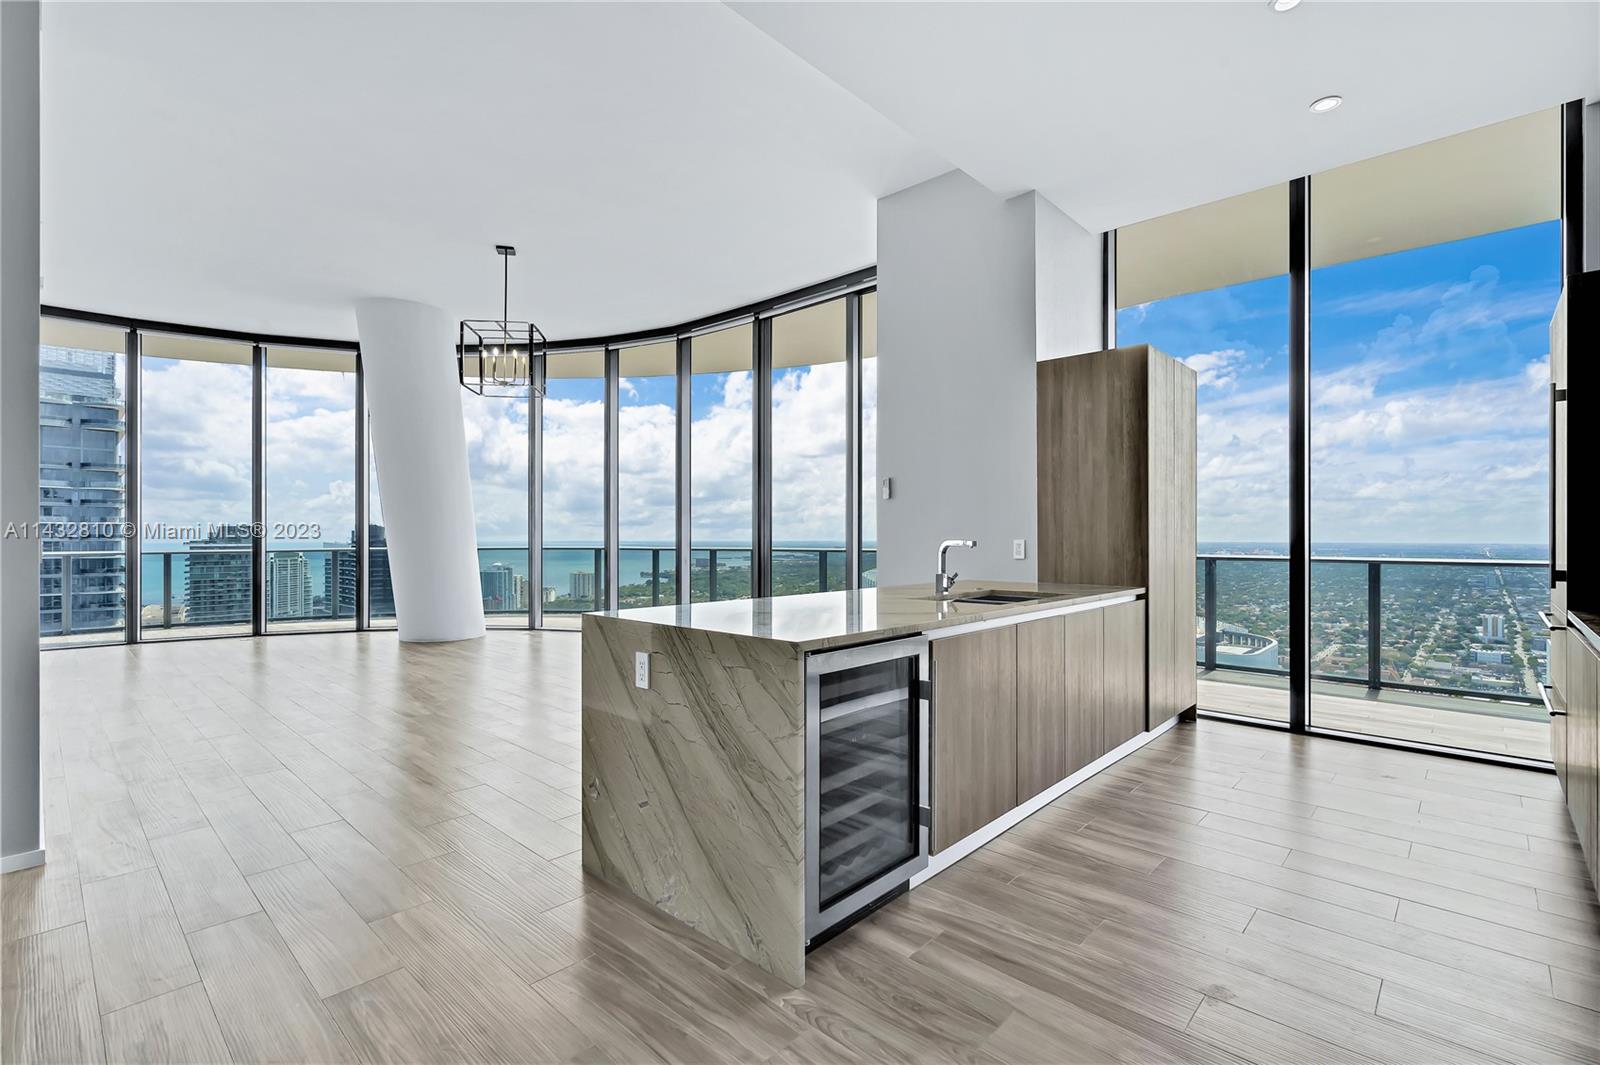 SLS LUX PH with skyline views. Floor to ceiling windows throughout with 12 Ft celling. These 3 beds 3.5 bath is the perfect residence to live in. Includes a private elevator w/biometrics technology. The amenities include SLS LUX Spa & room service from the Gekko restaurant/bar, access to the 58th level rooftop & pool, two-story Cava lounge, Jacuzzi, Tennis court, rock-climbing wall, basketball court & full-service fitness center. Living at SLS Lux allows you to live in complete luxury and have access to world class amenities & services.